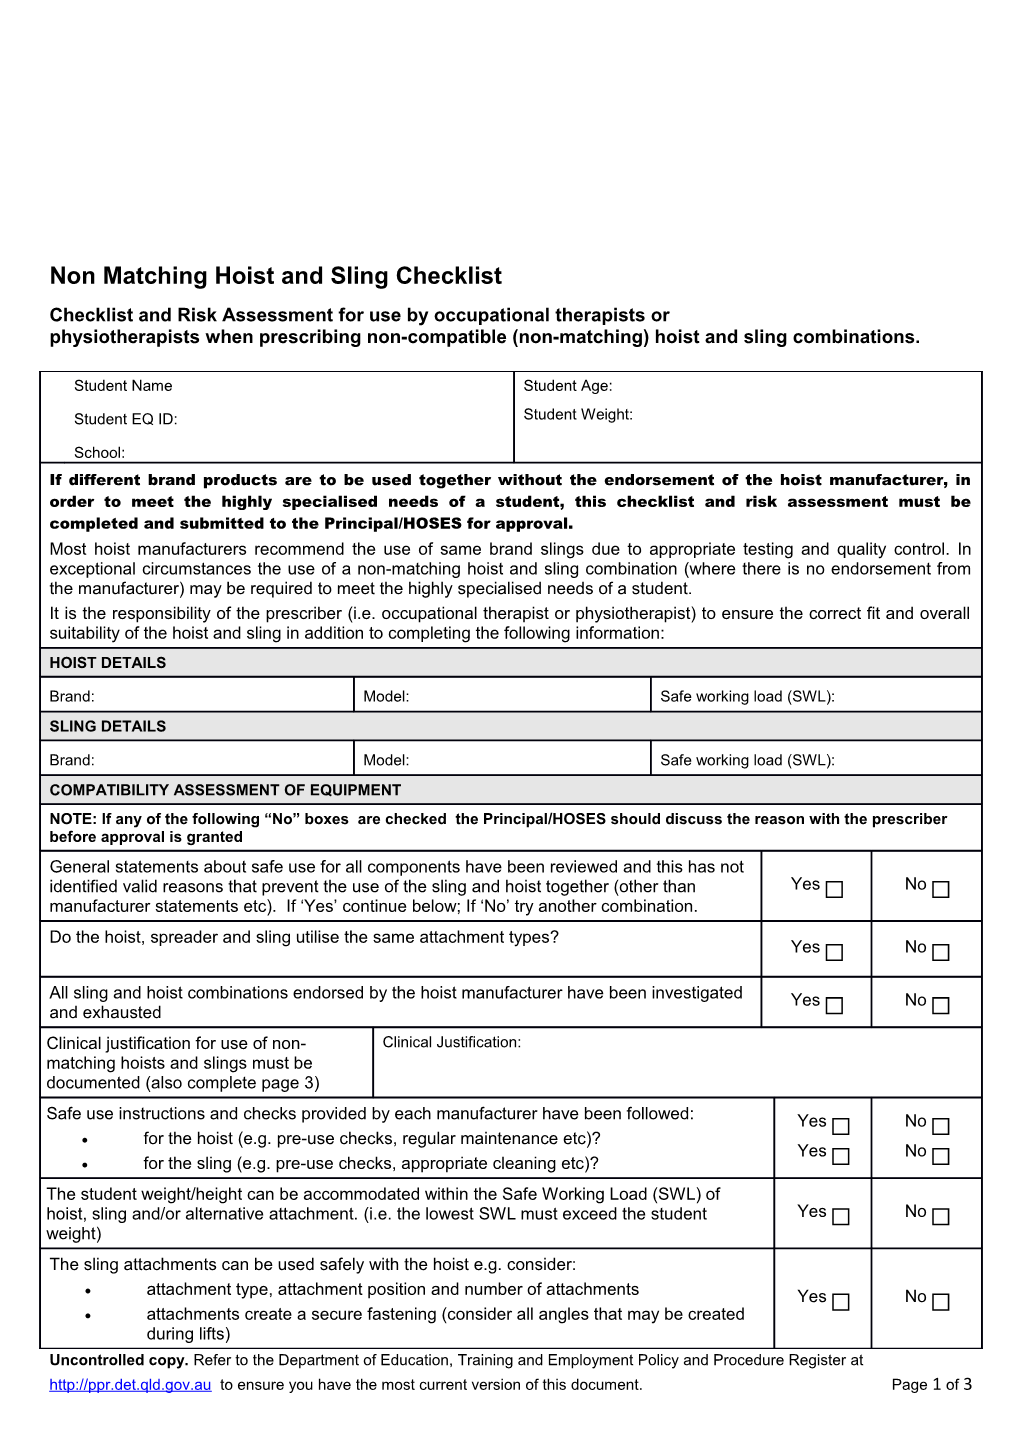 Non Matching Hoist and Sling Checklist